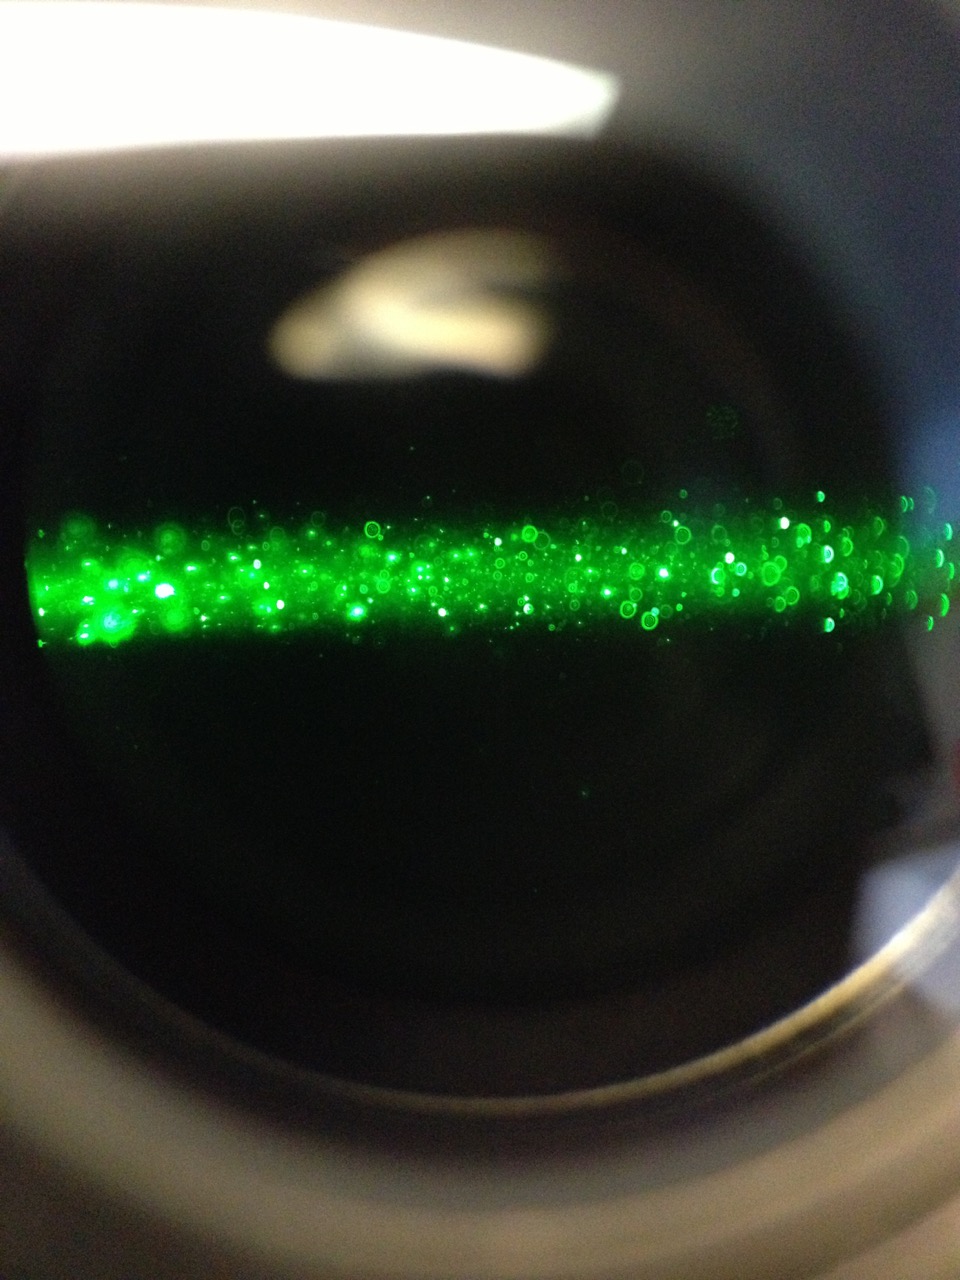 The green specks are a microscope image of the particles Power researched during her co-op placement at CReATe Fertility Centre. The image was taken through a special microscope called a Nanosight.